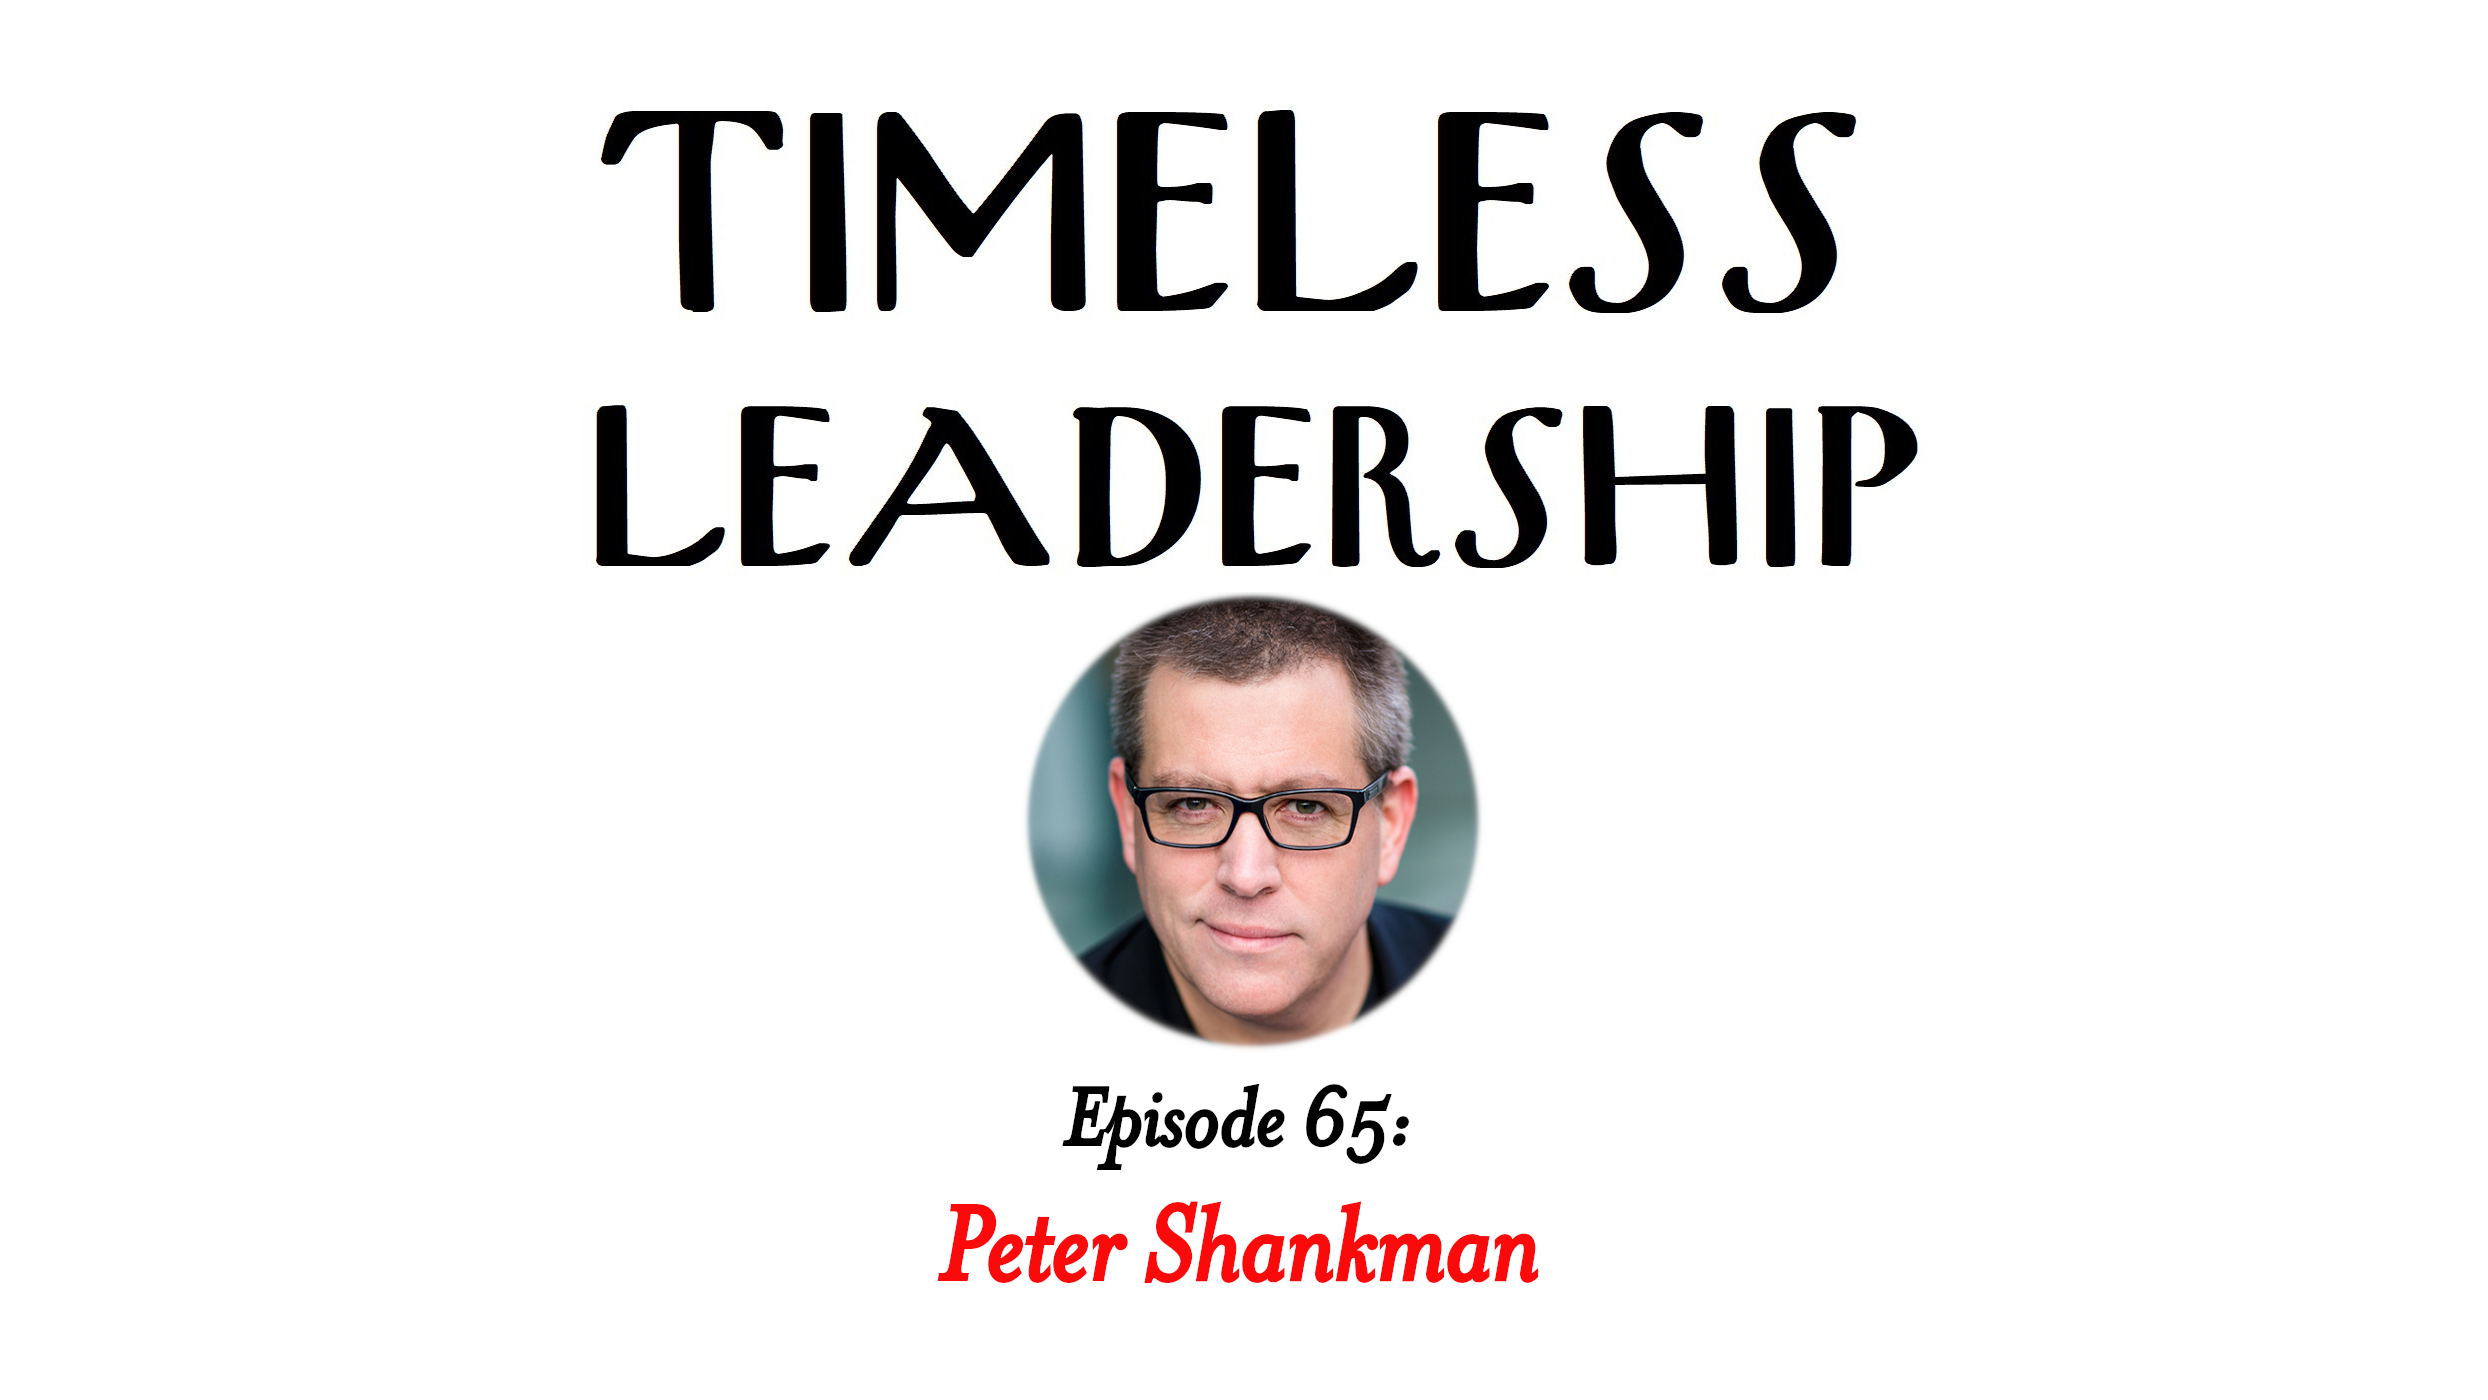 Episode 65: Faster Than Normal with Peter Shankman